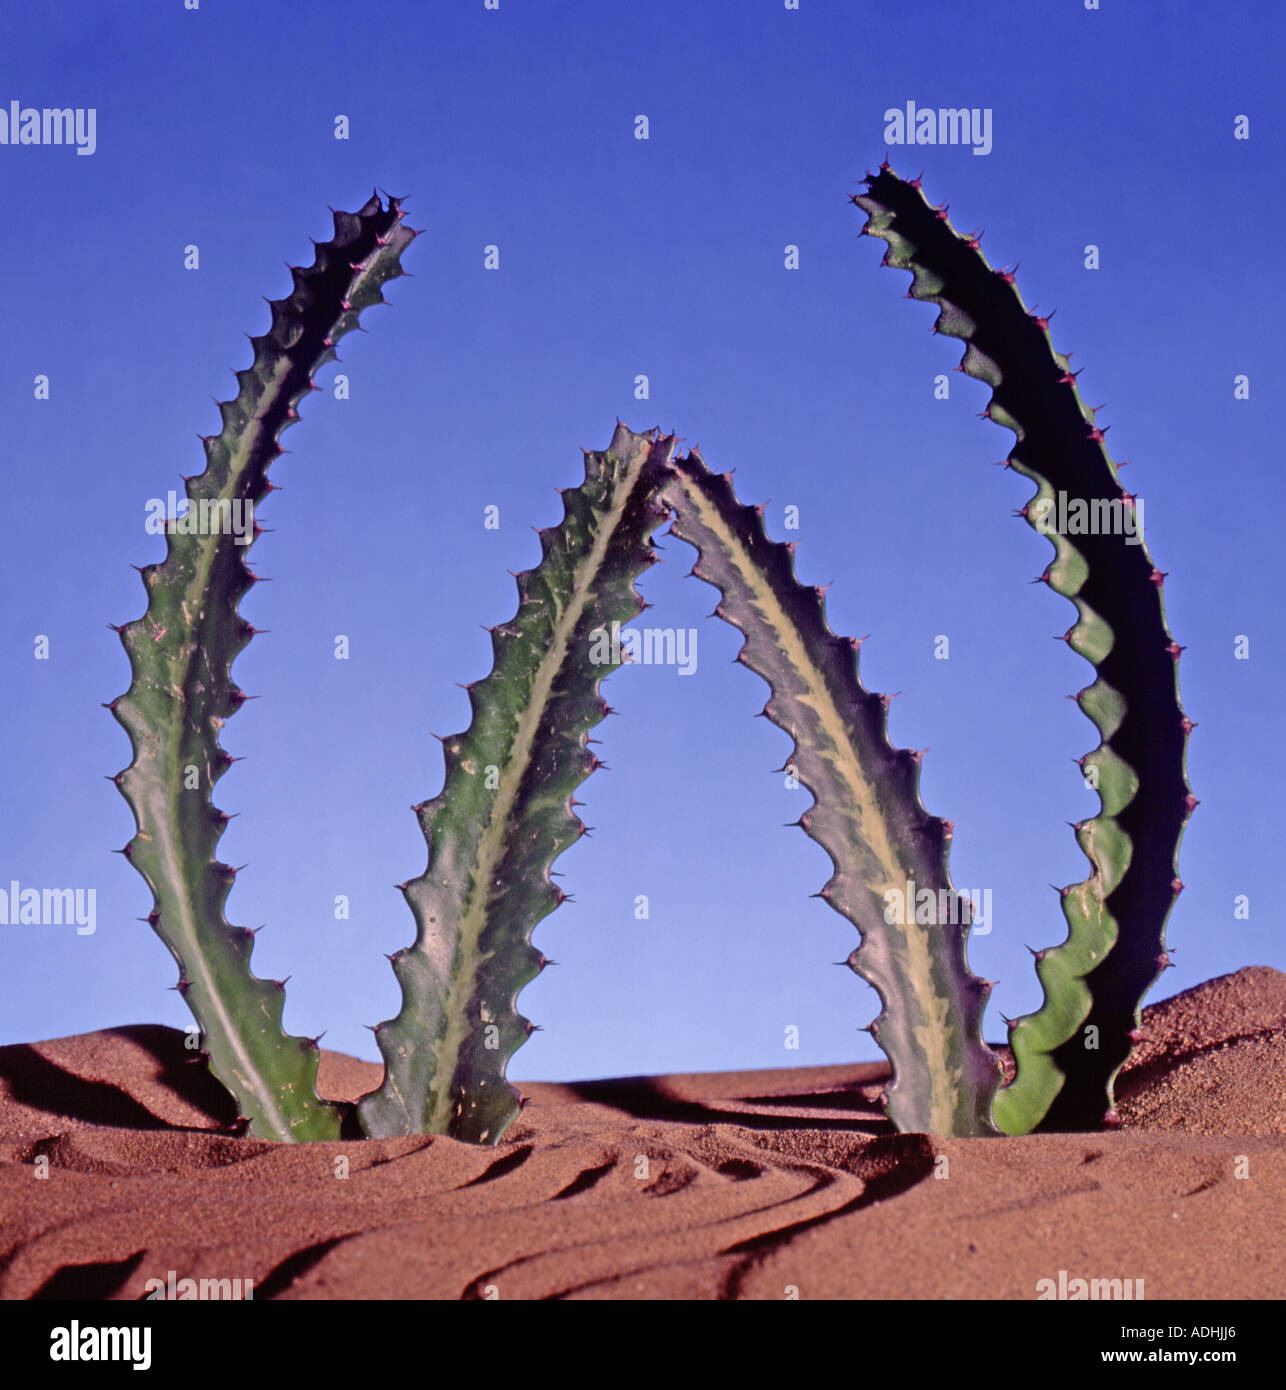 W Letter shaped from a cactus Stock Photo